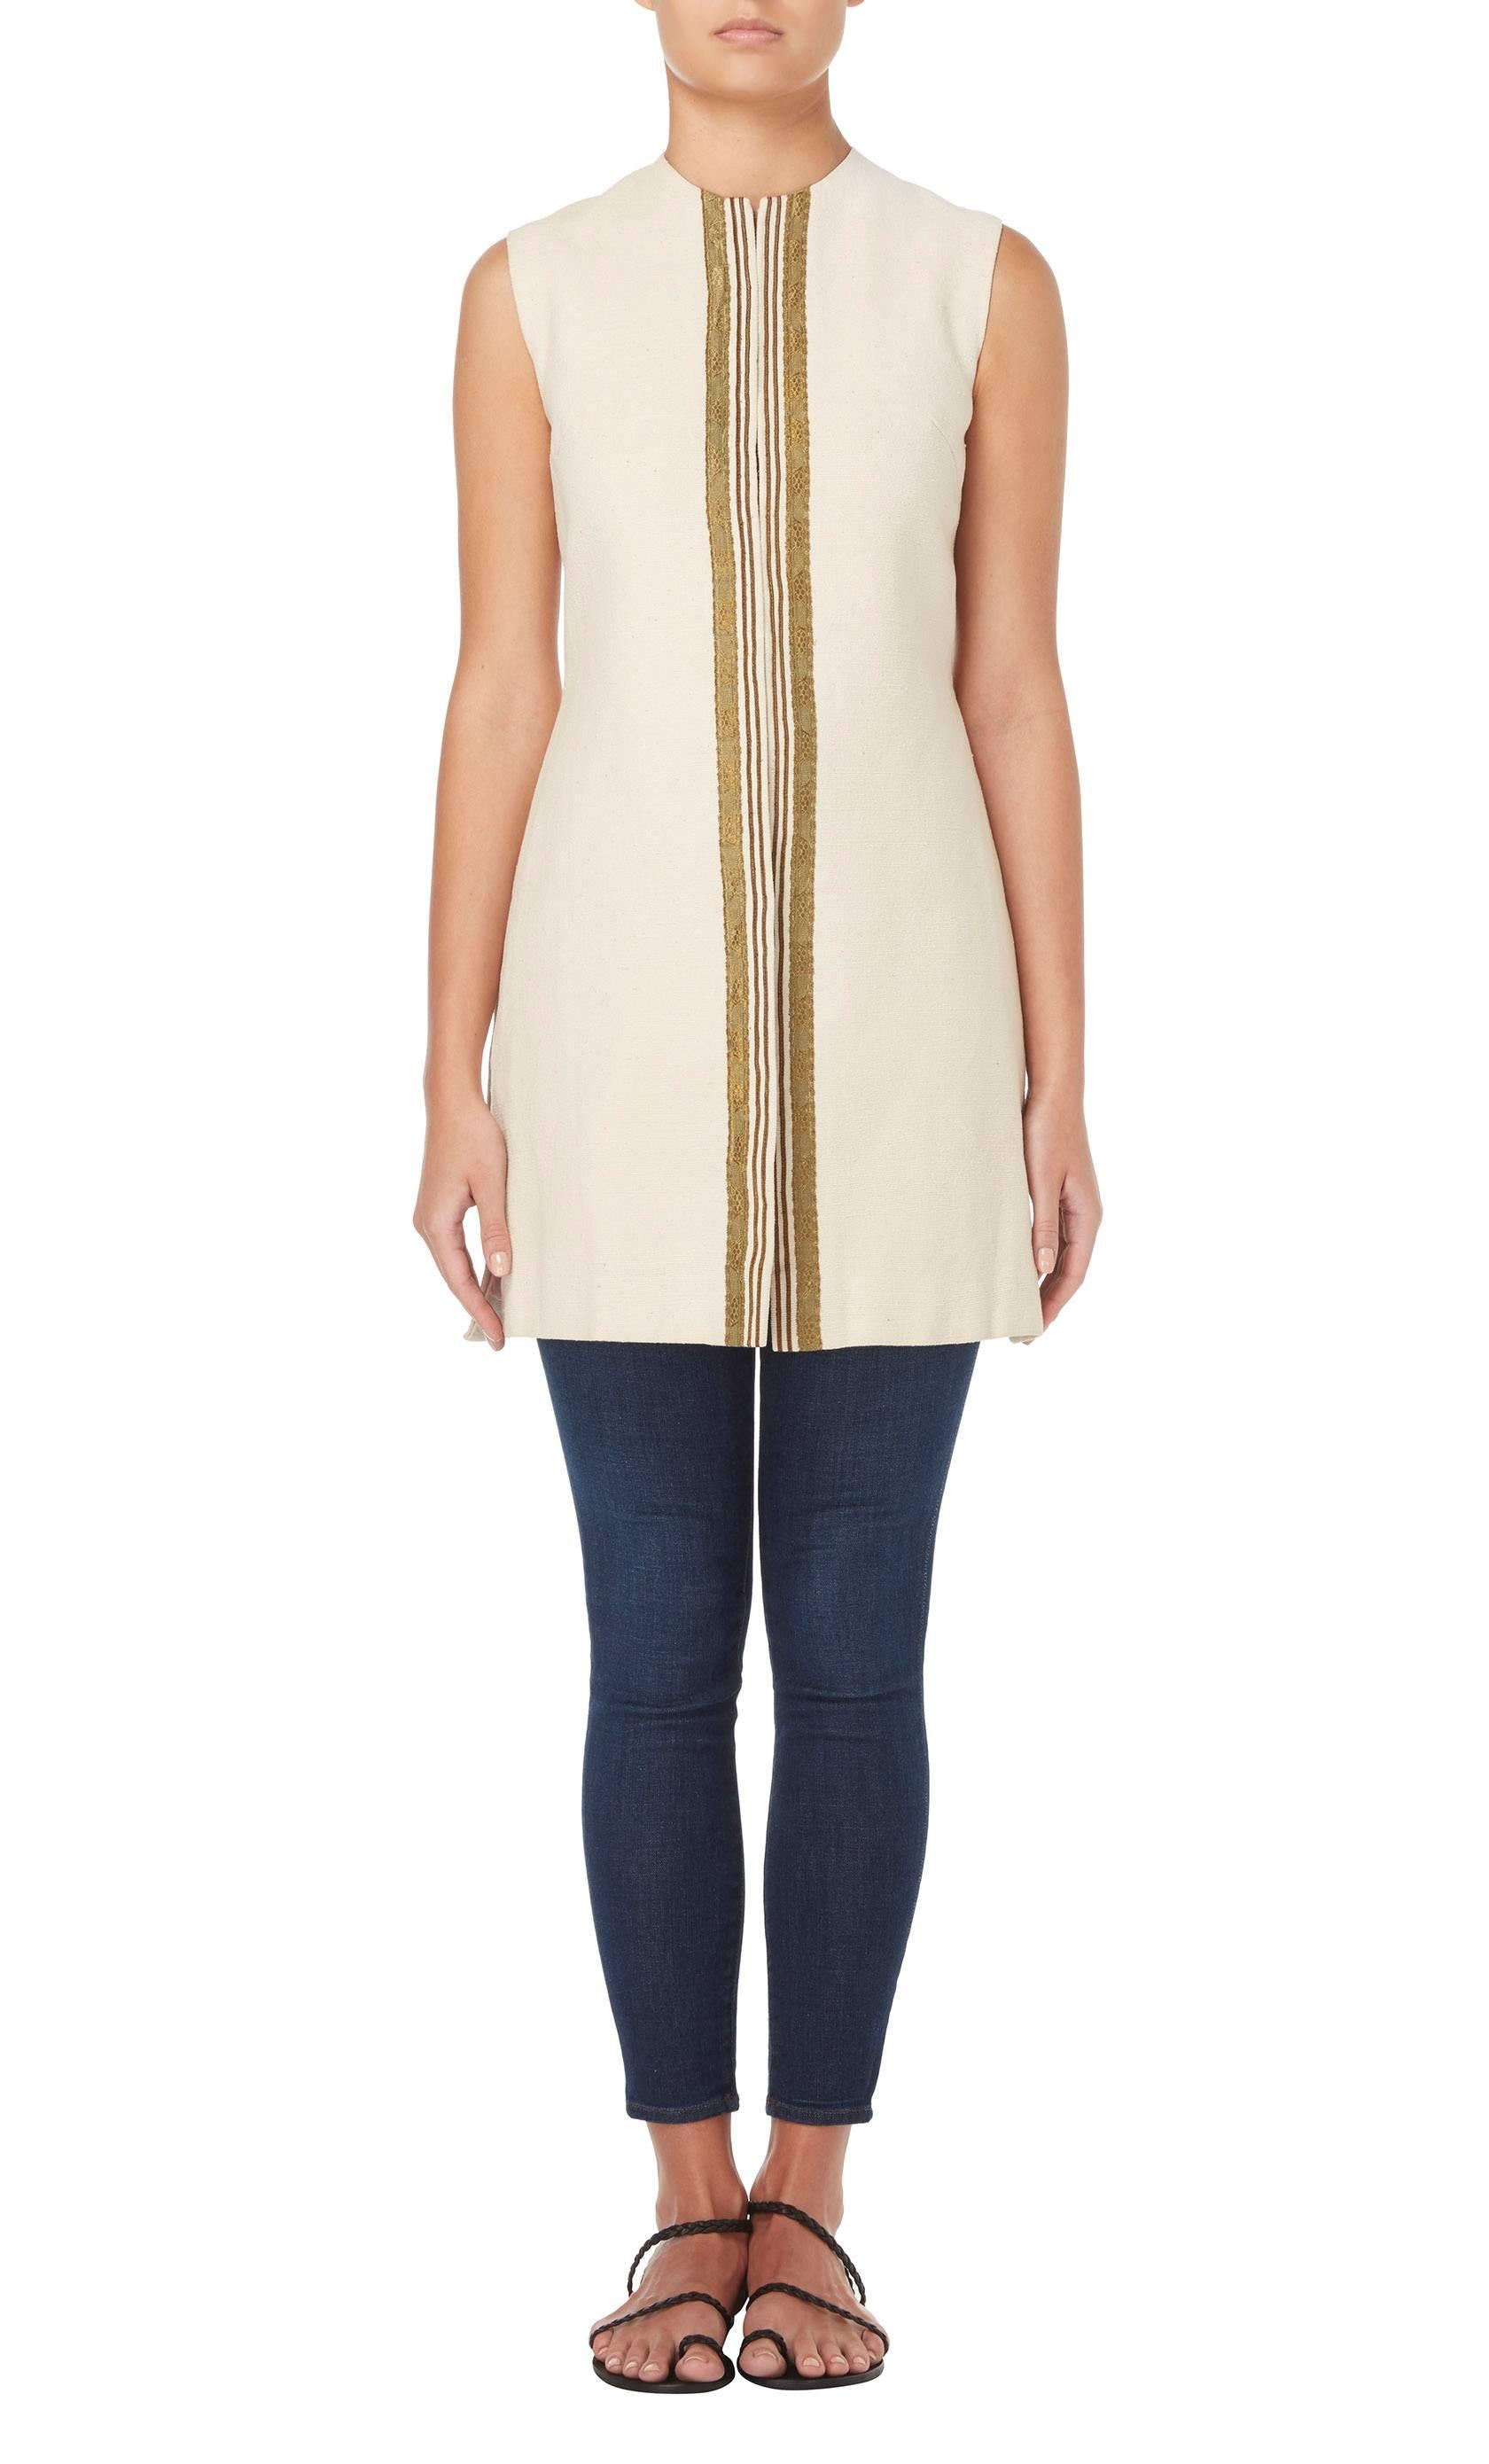 
Designed by the queen of bohemian chic, Thea Porter, and one of her rare couture pieces, this waistcoat is a fantastic piece. Constructed in ivory ribbed raw silk and trimmed with a gold braid to the leading edge, it is perfect for wearing over a